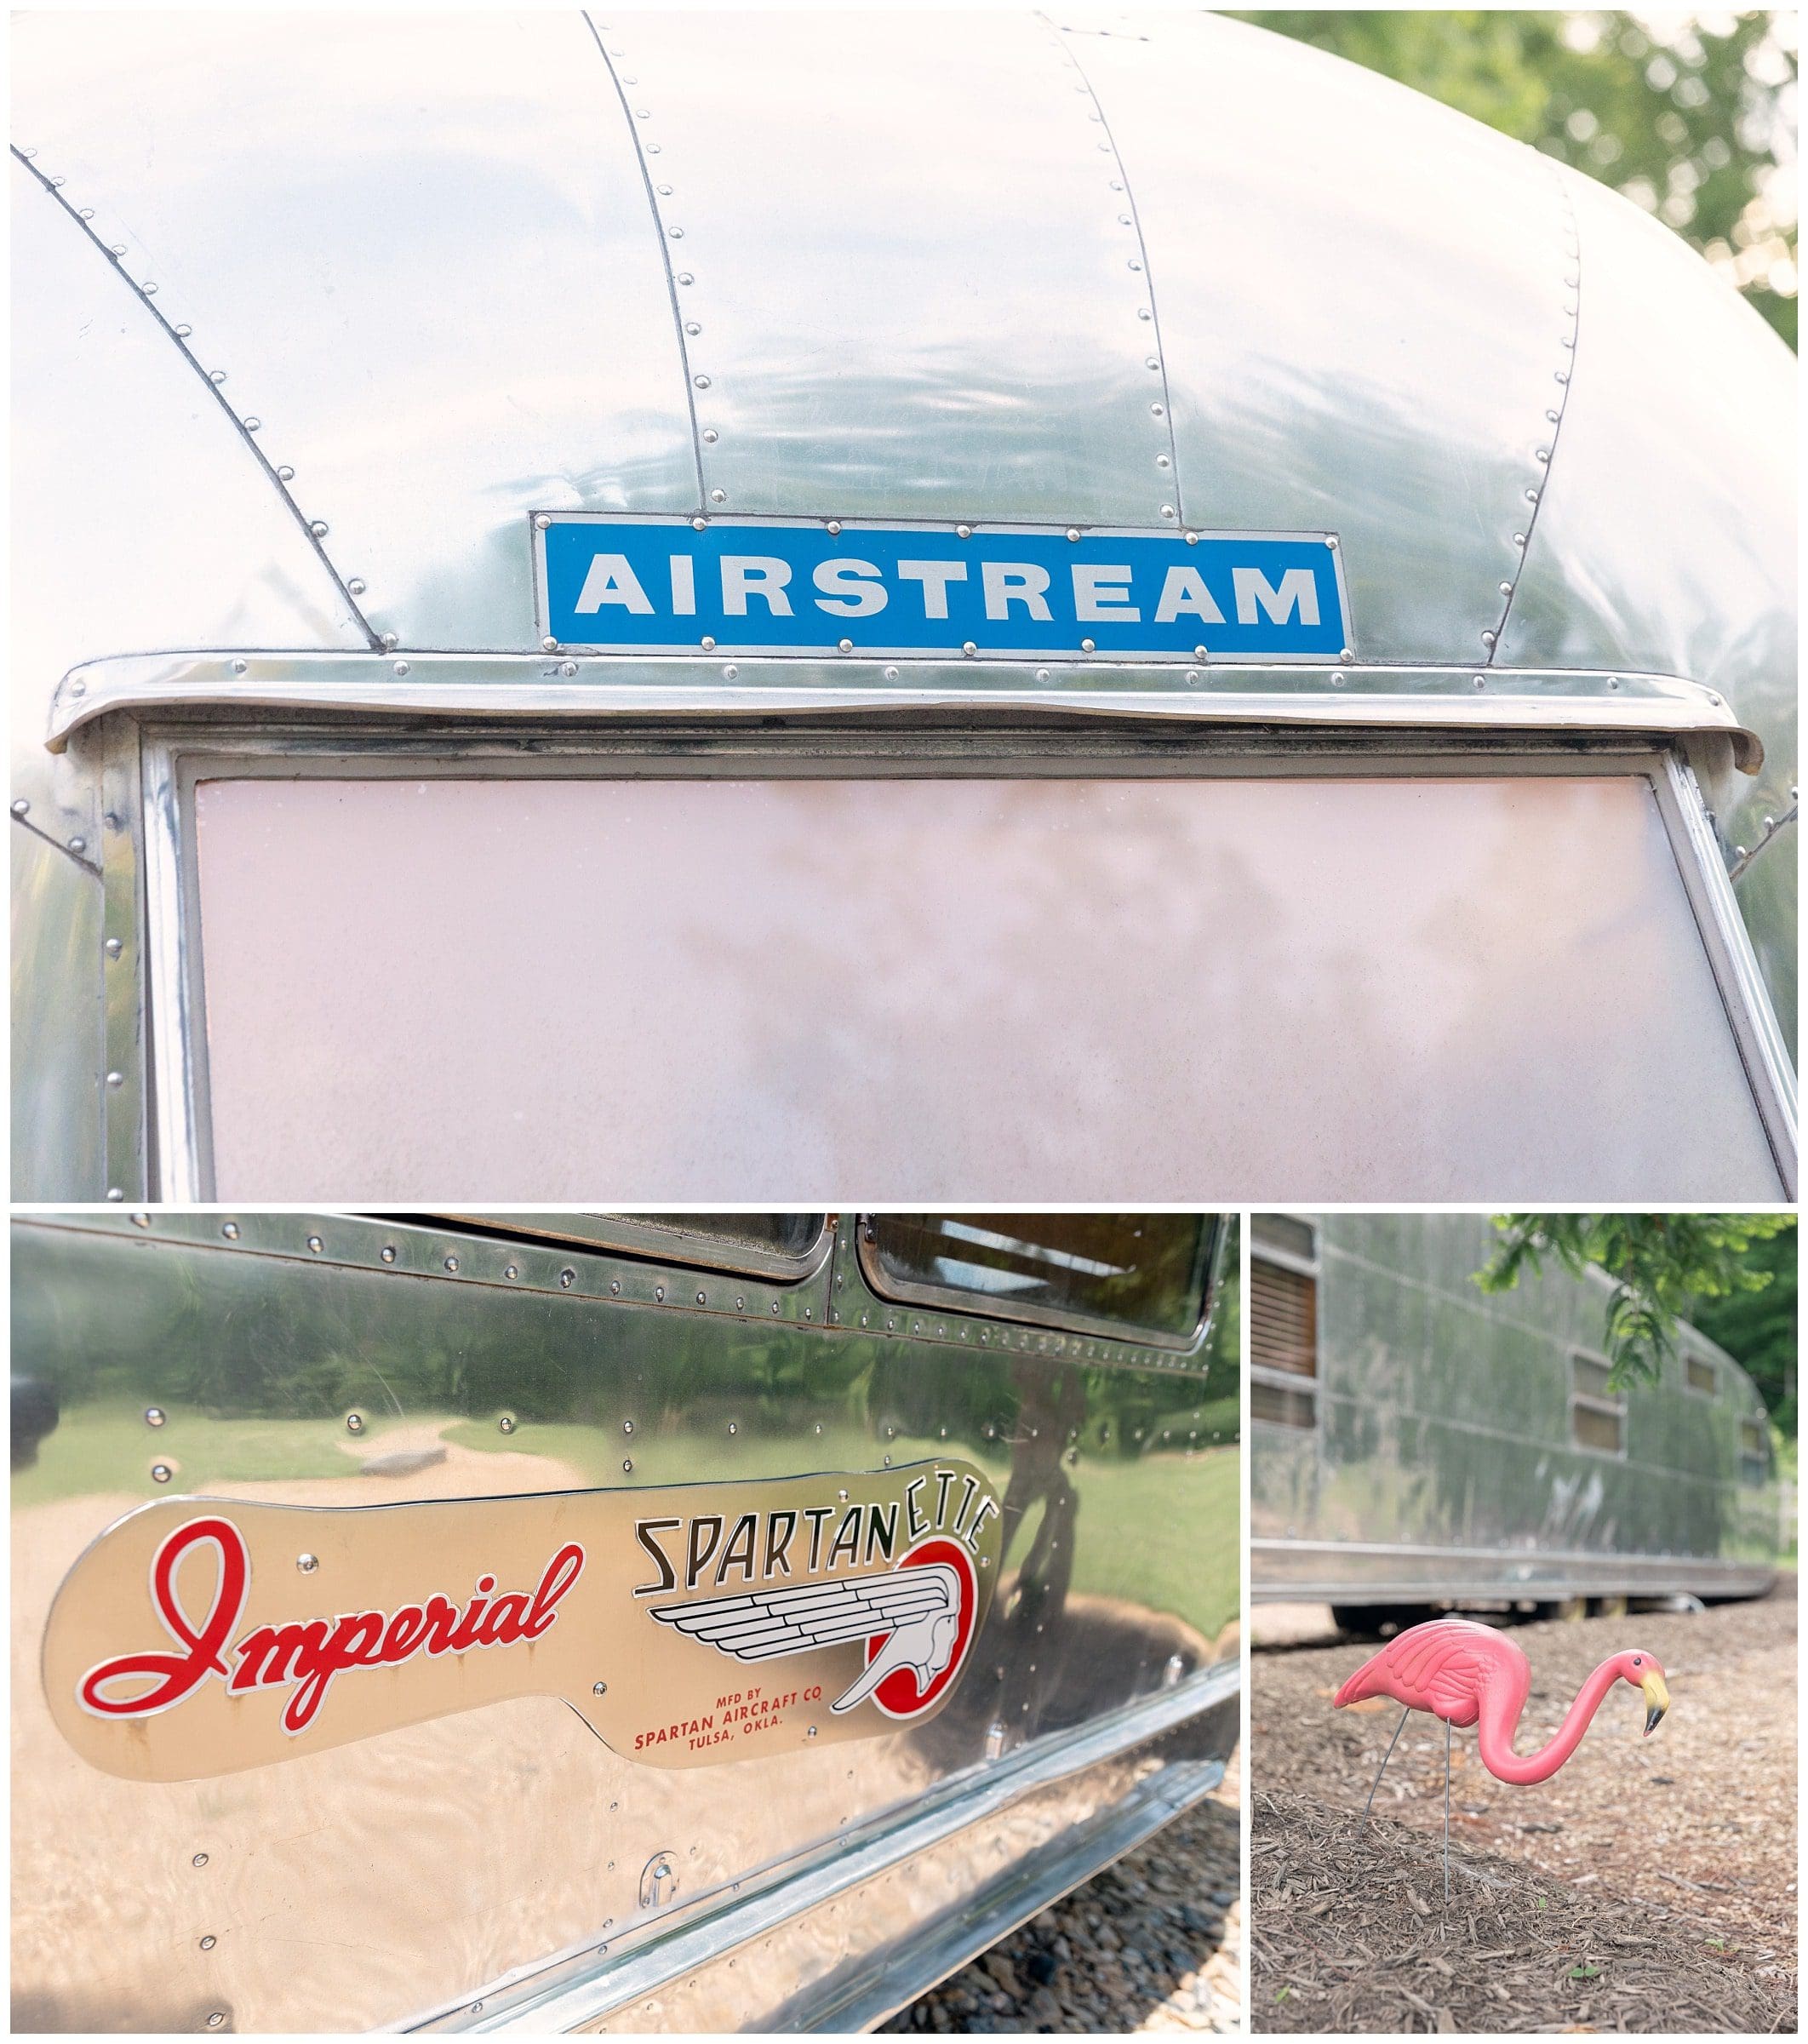 Fun details of the June Bug Retro Venue and Airstream and Imperial Spartan silver metal camper.